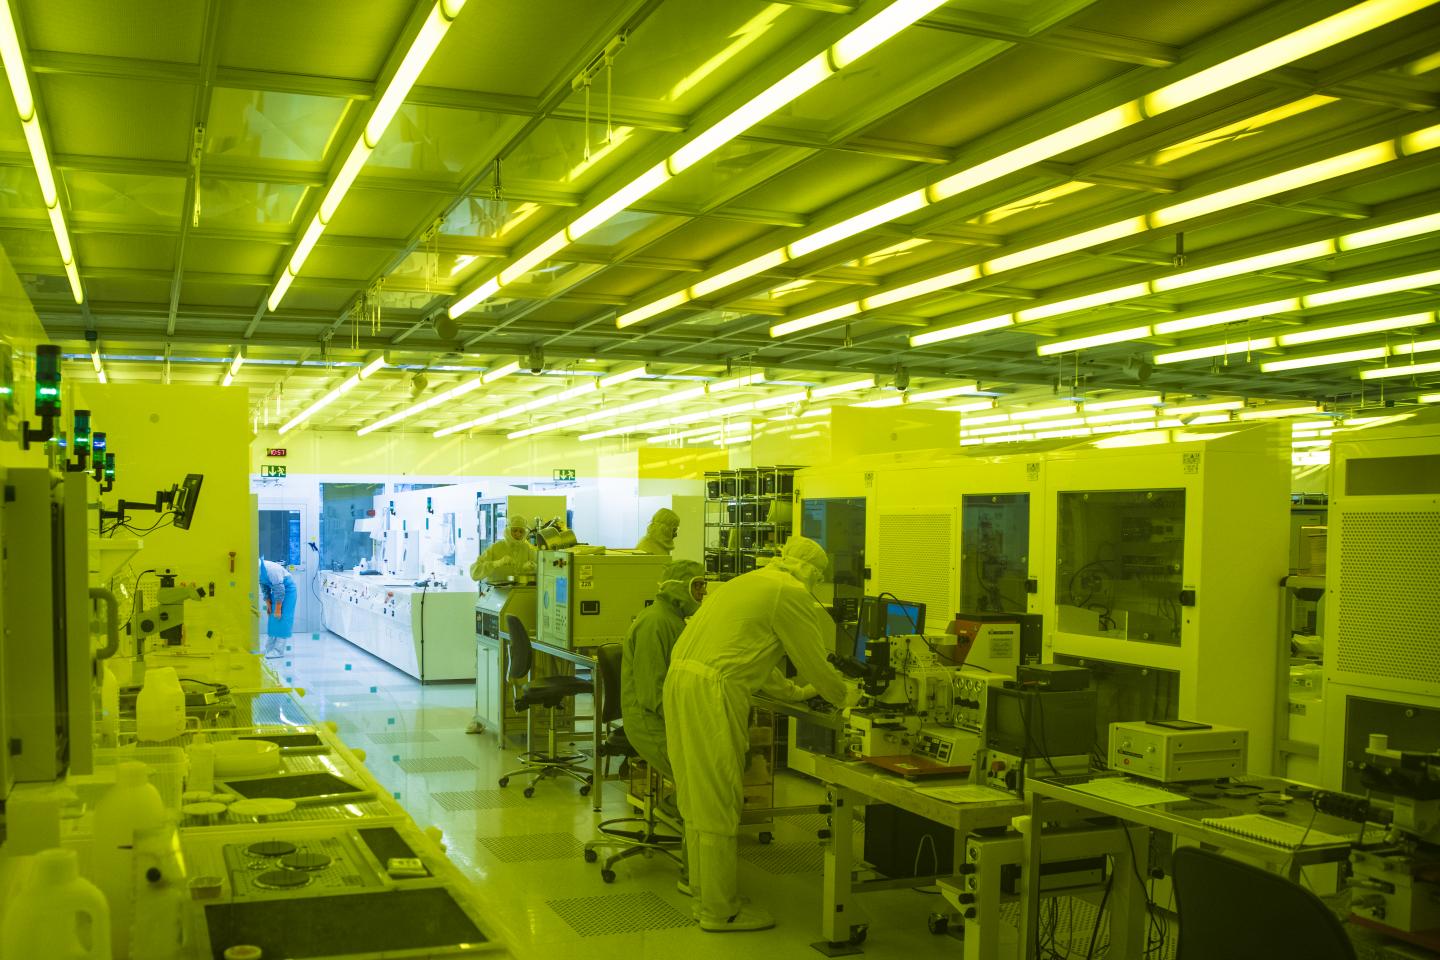 A Dust-free Clean Room is Required to Work with Quantum Devices